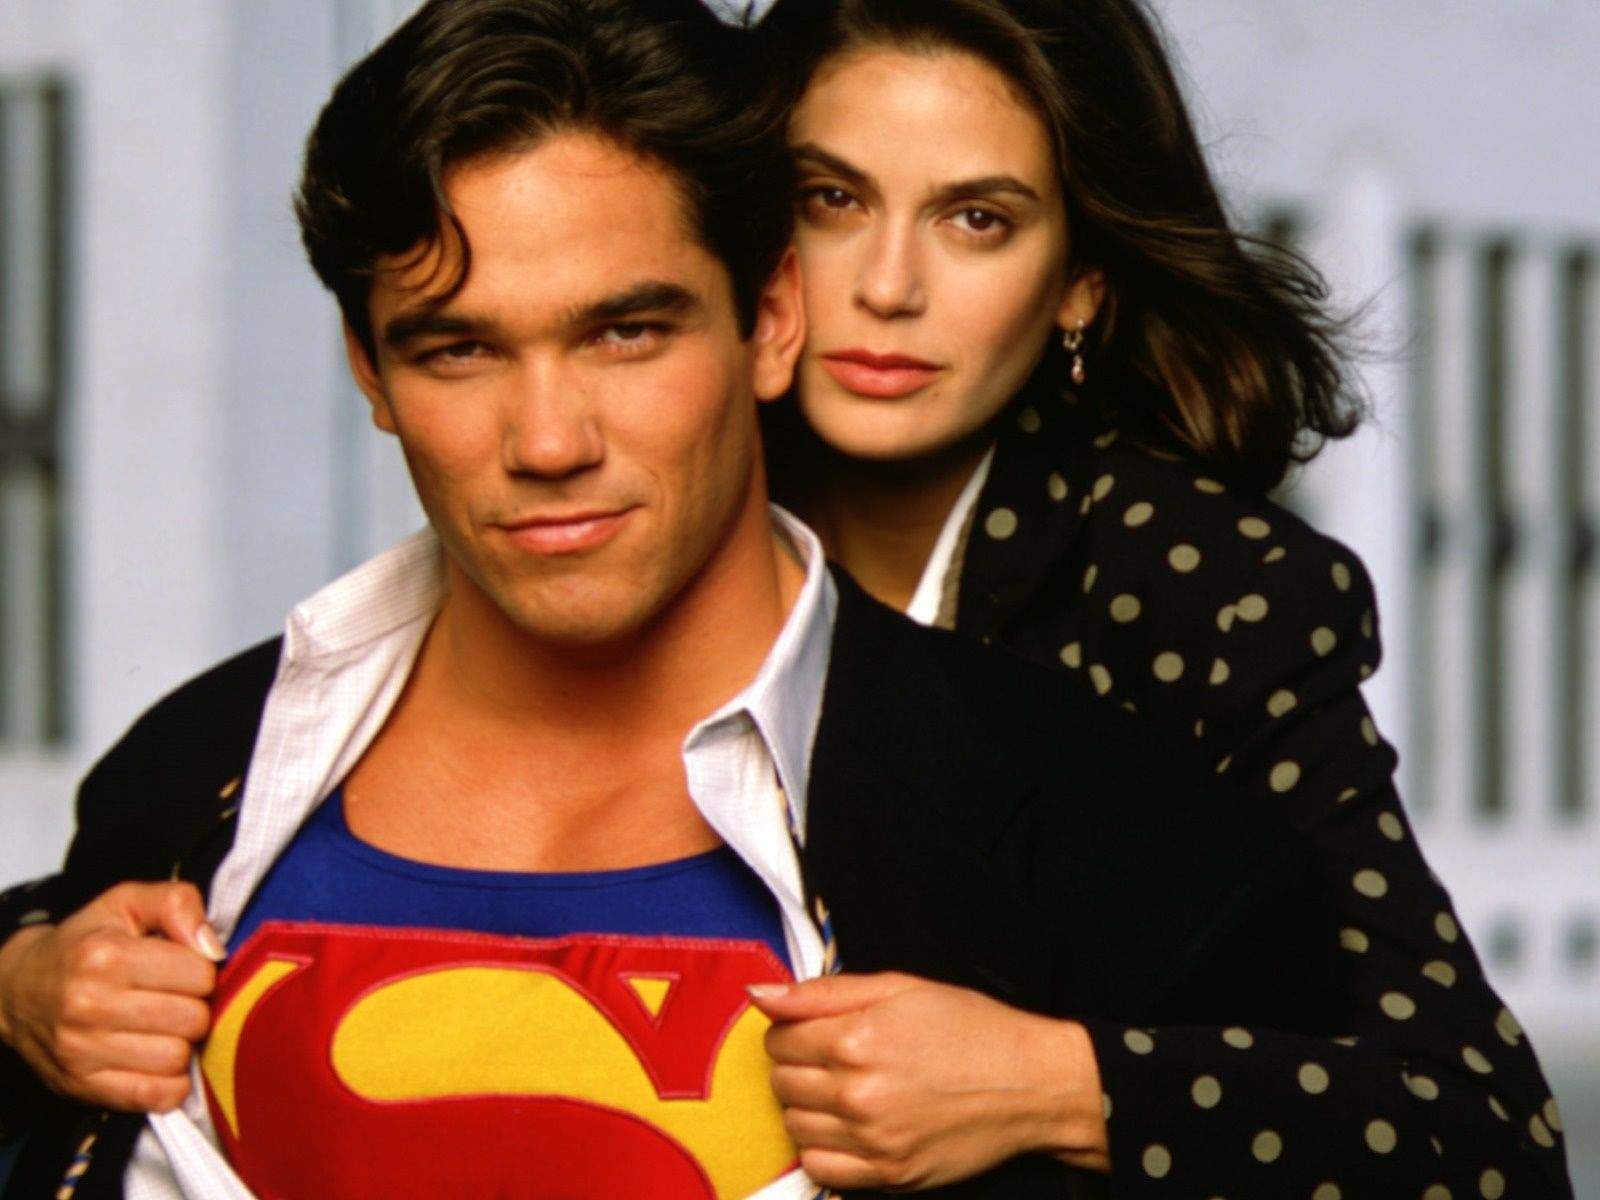 For years in the pages of DC, the status quo for Lois Lane and Clark Kent were the two coworkers who, even before their comic book wedding, essentially behaved like an old married couple: bickering with one another, finishing each other’s sentences, and generally acting like characters who had been stuck treading water for the past 50 years. Which is exactly what they were.Lois and Clark shook up the dynamic by taking both characters back to basics and developing their relationship from the first meeting. Sure, not every aspect of the show has held up (the special effects look a bit ropey) but as a character study showing how both became the people we know them as today, it was perfect.Photo: Warner Bros. Television